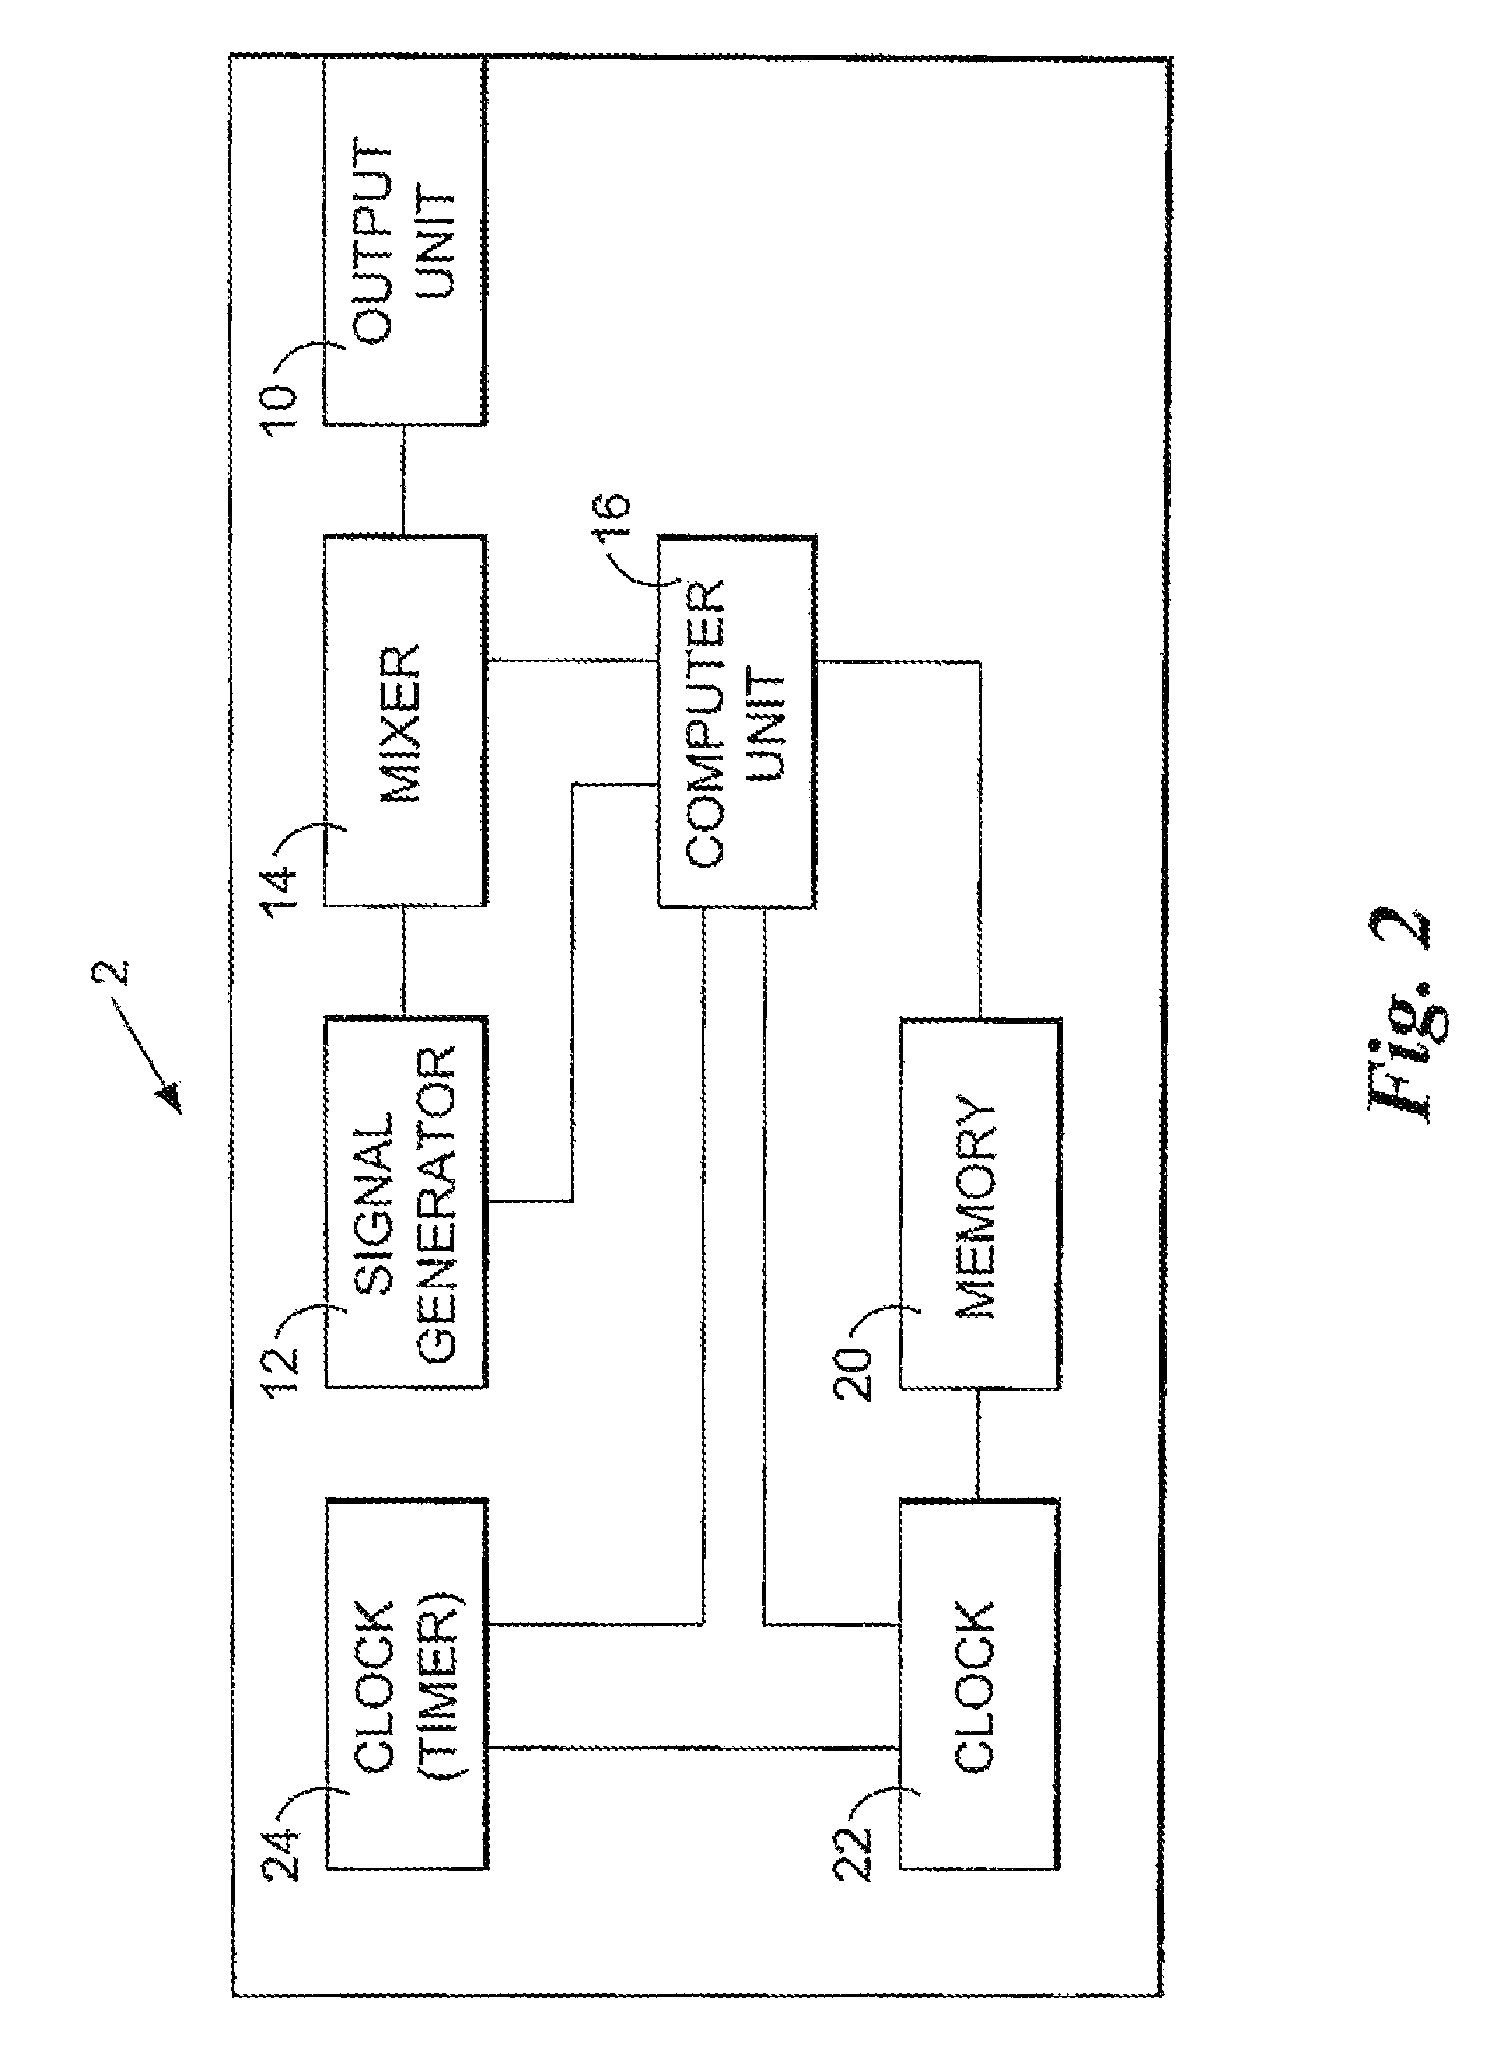 System and method for accident prevention